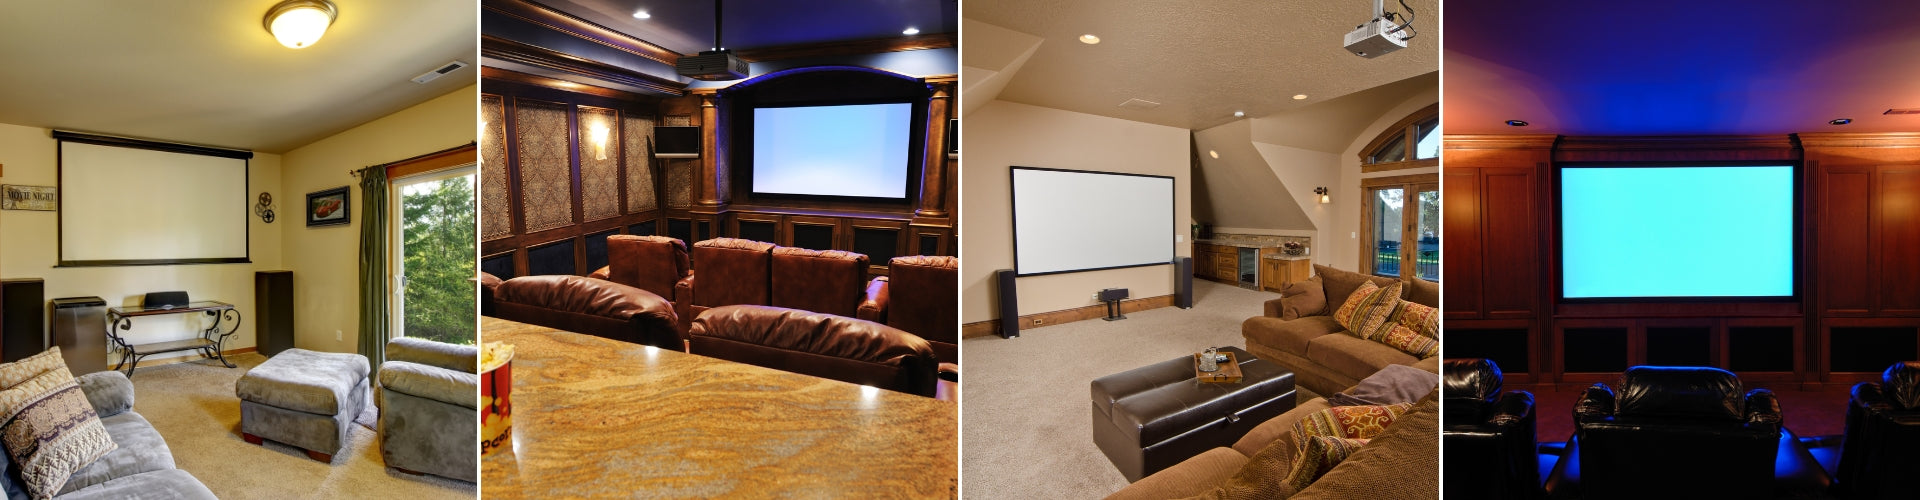 A collection of four home theater rooms. Two of the rooms are multipurpose living rooms of moderate size. The other two rooms are larger dedicated home theater rooms.